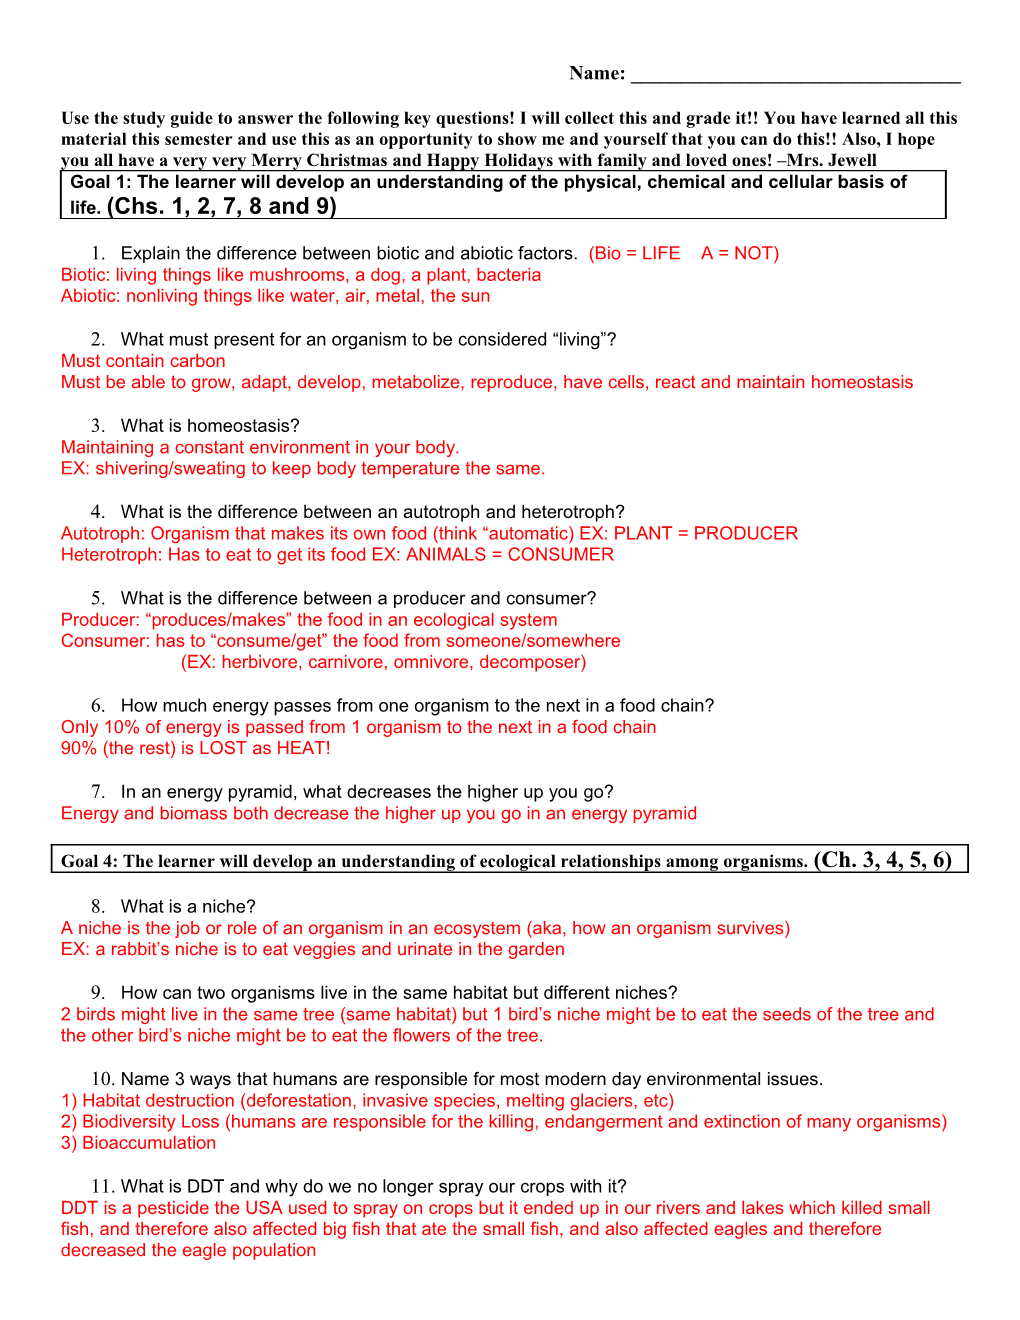 Use the Study Guide to Answer the Following Key Questions! I Will Collect This and Grade